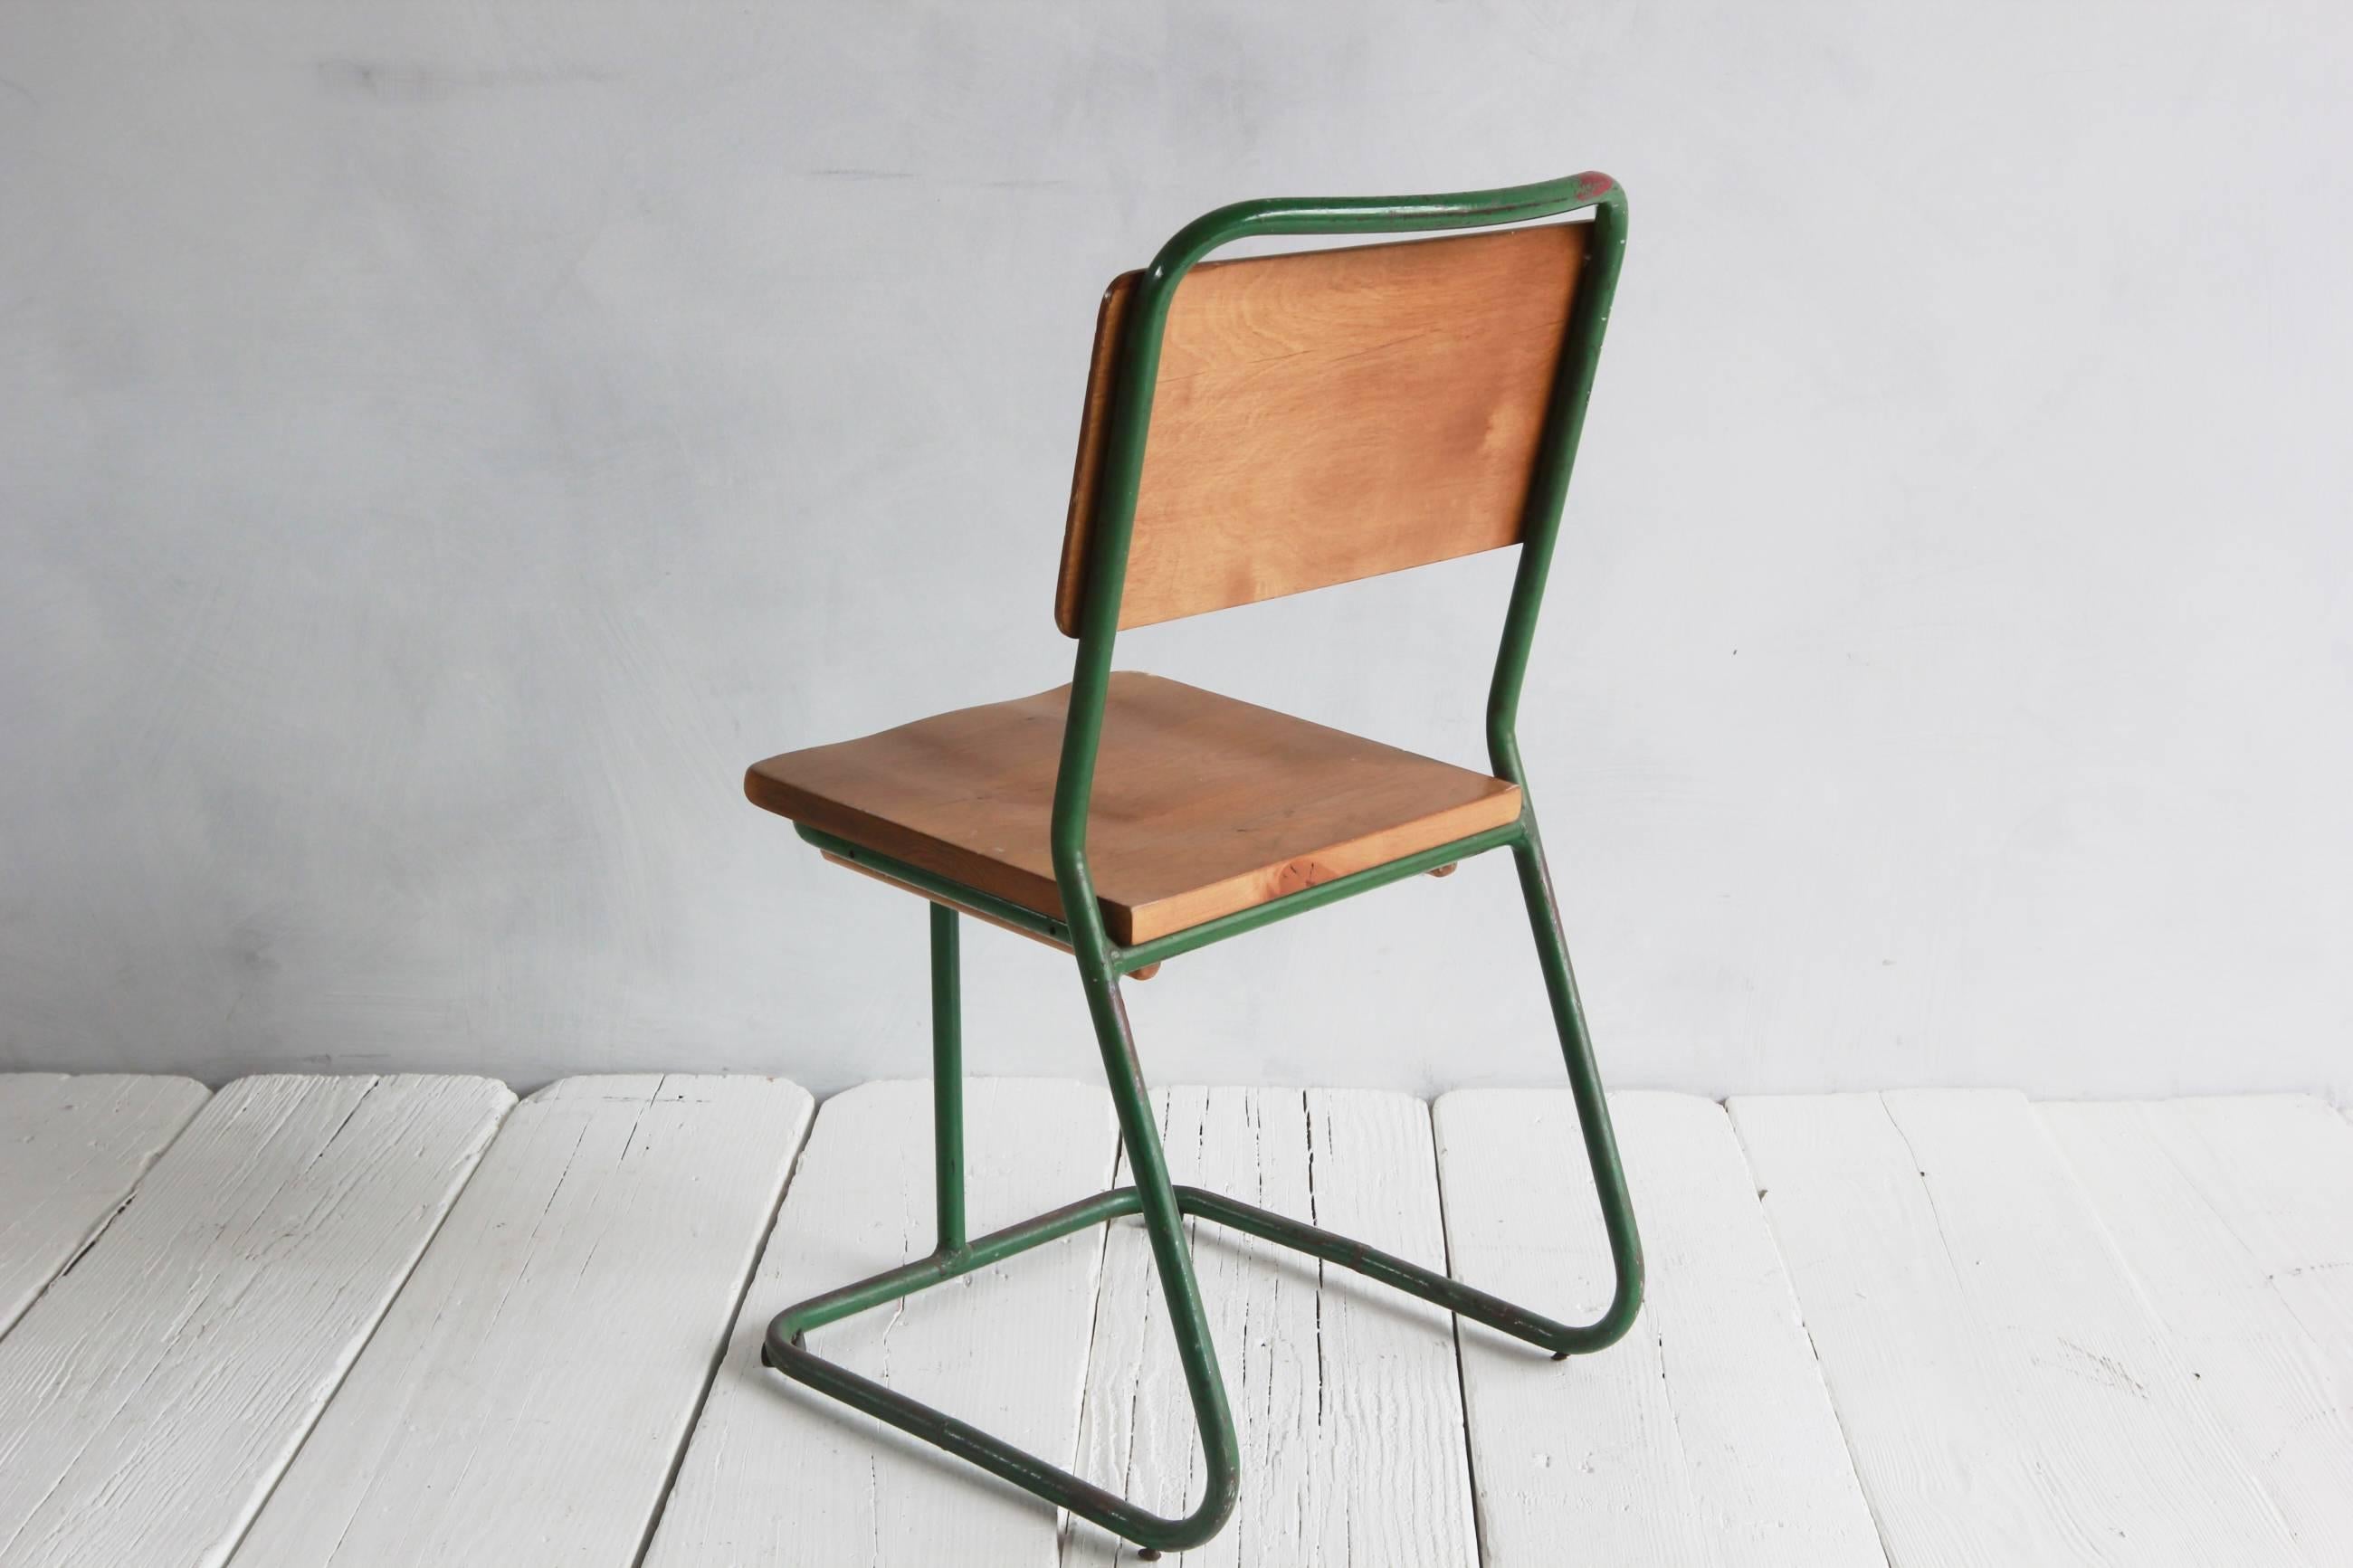 Mid-20th Century Prouve Style Green Painted Metal Chair with Wood Seat and Back